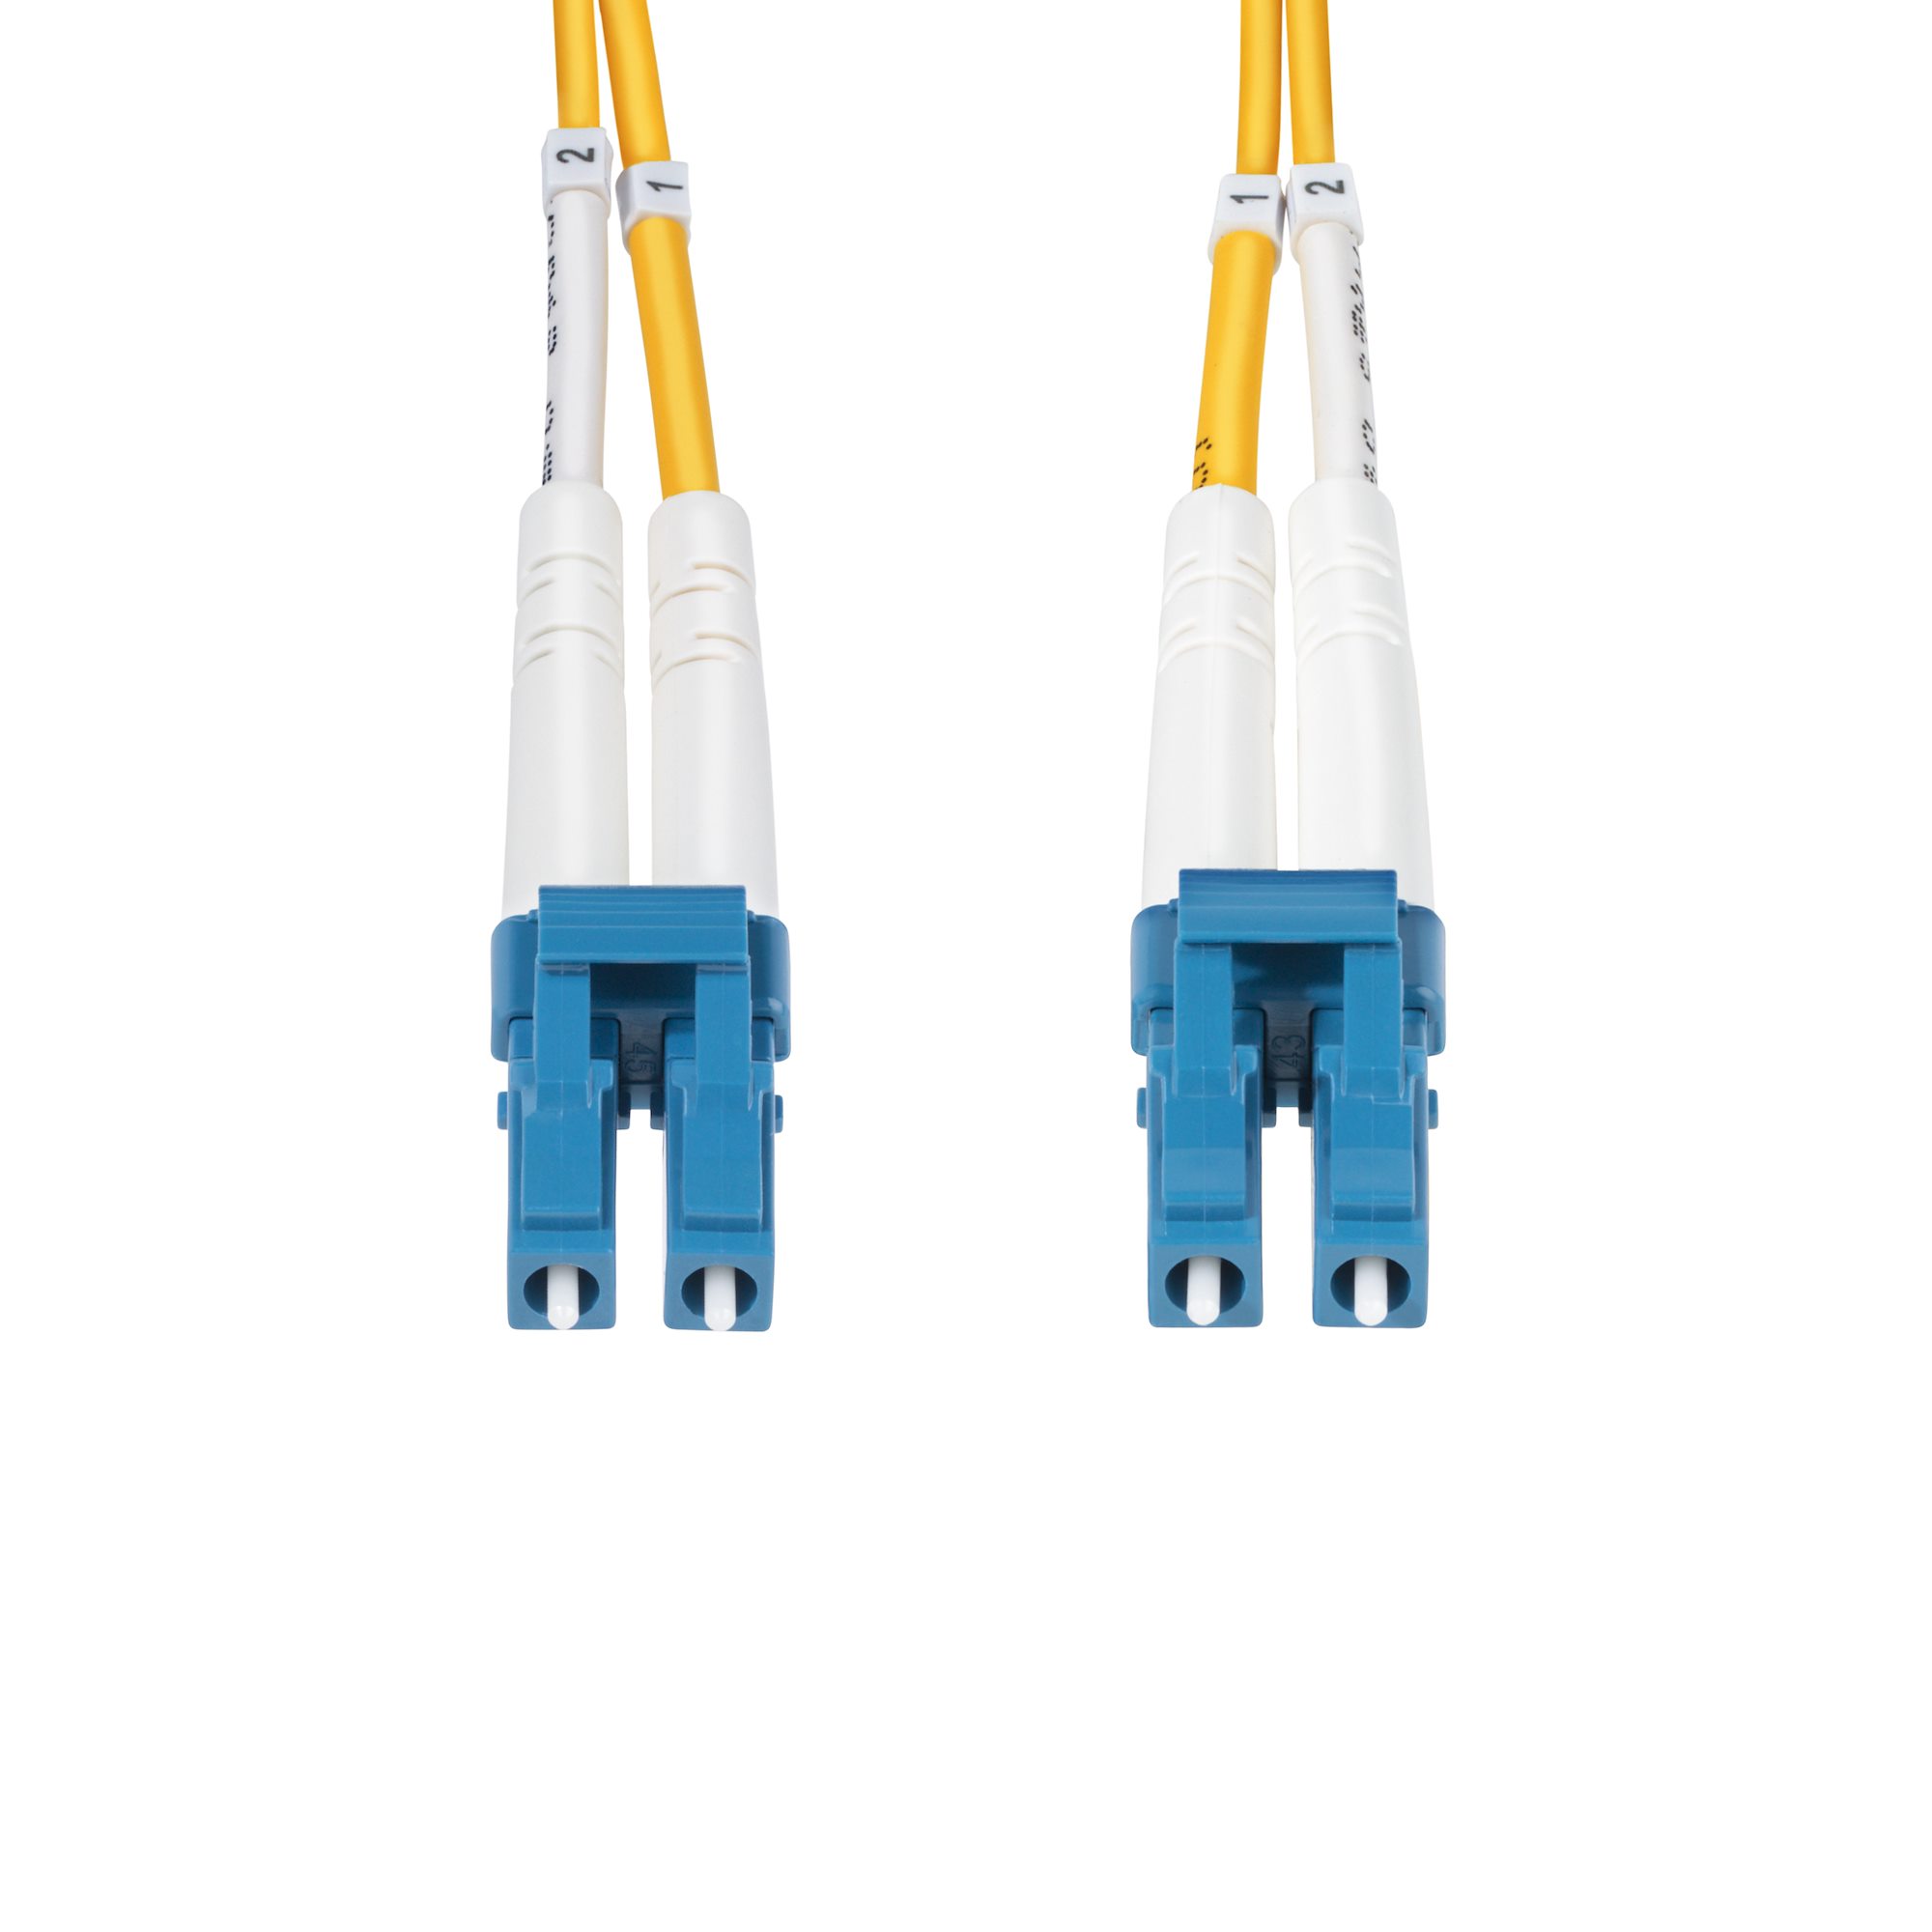 25m (82ft) LC to LC (UPC) OS2 Single Mode Duplex Fiber Optic Cable,  9/125µm, 100G, Bend Insensitive, Low Insertion Loss, LSZH Fiber Patch Cord